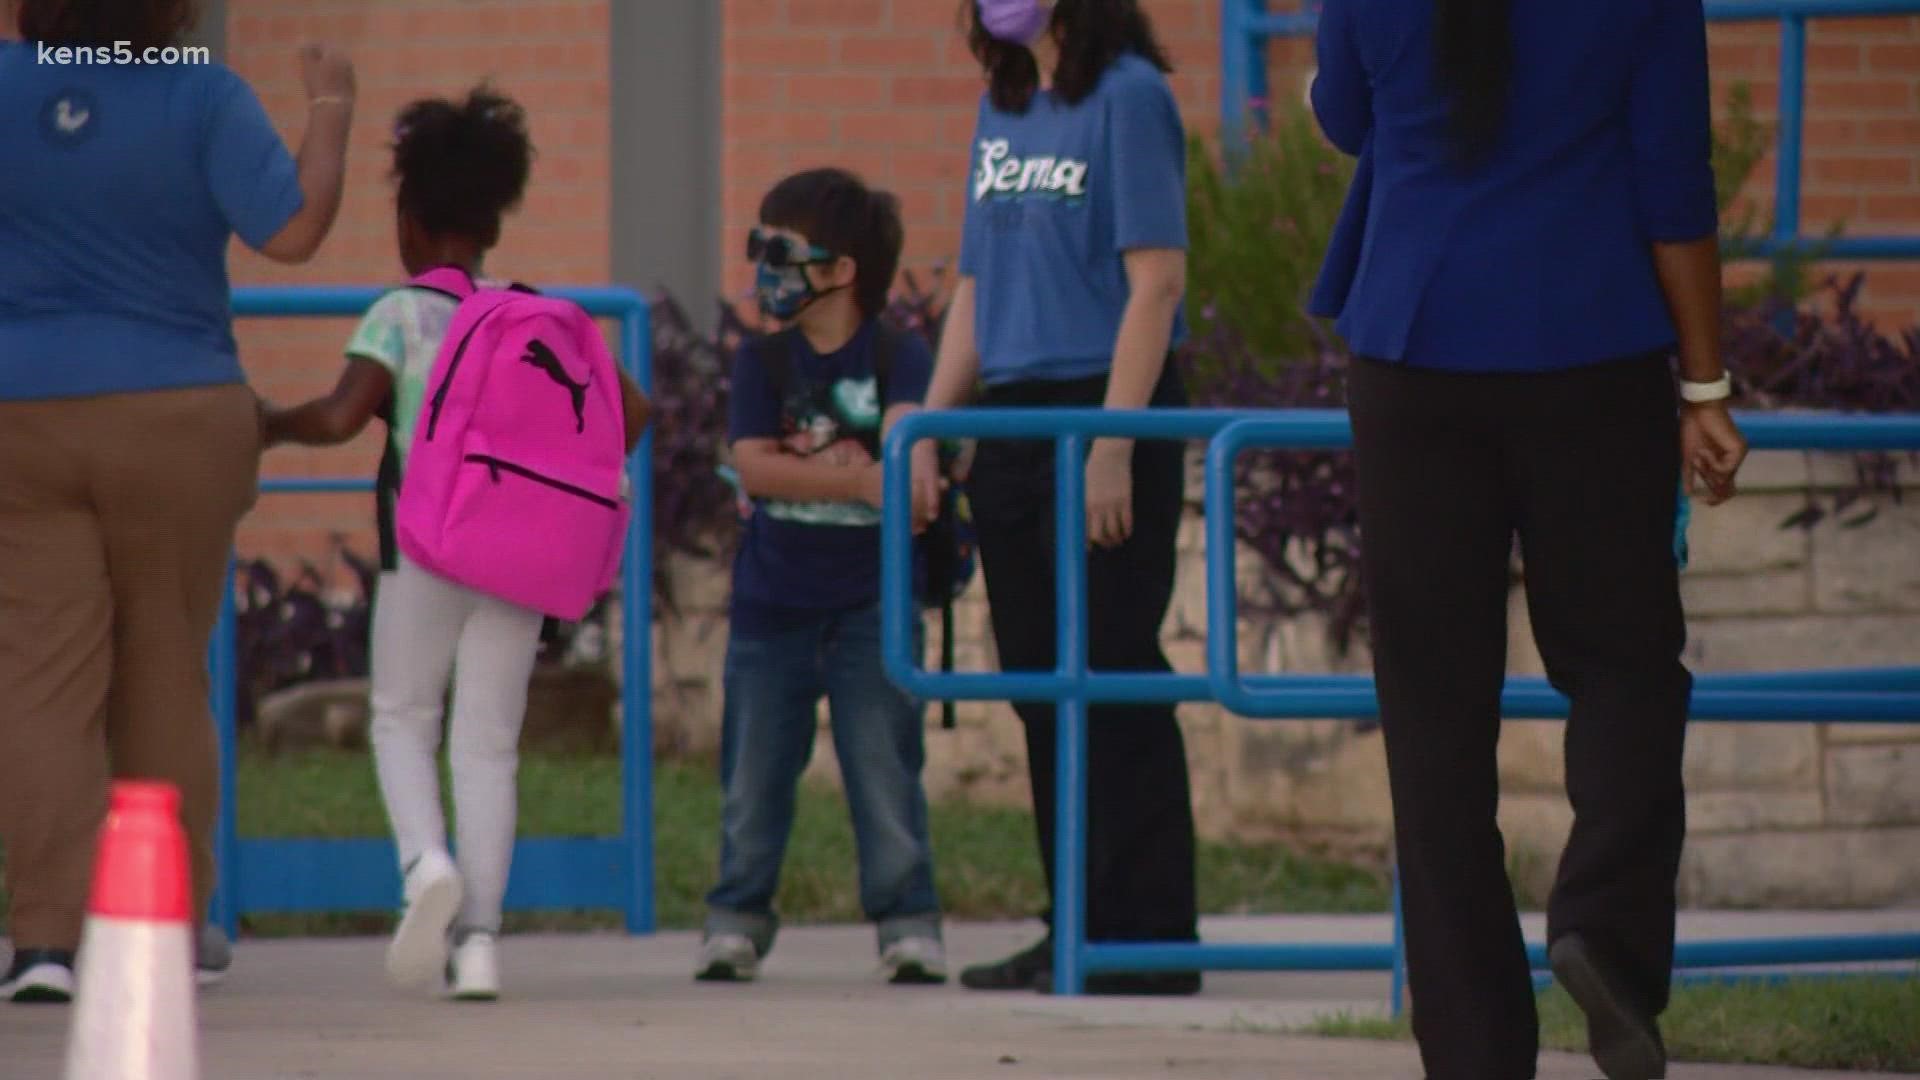 The decision on whether or not to mandate masks in school districts like North East ISD is divisive among parents.